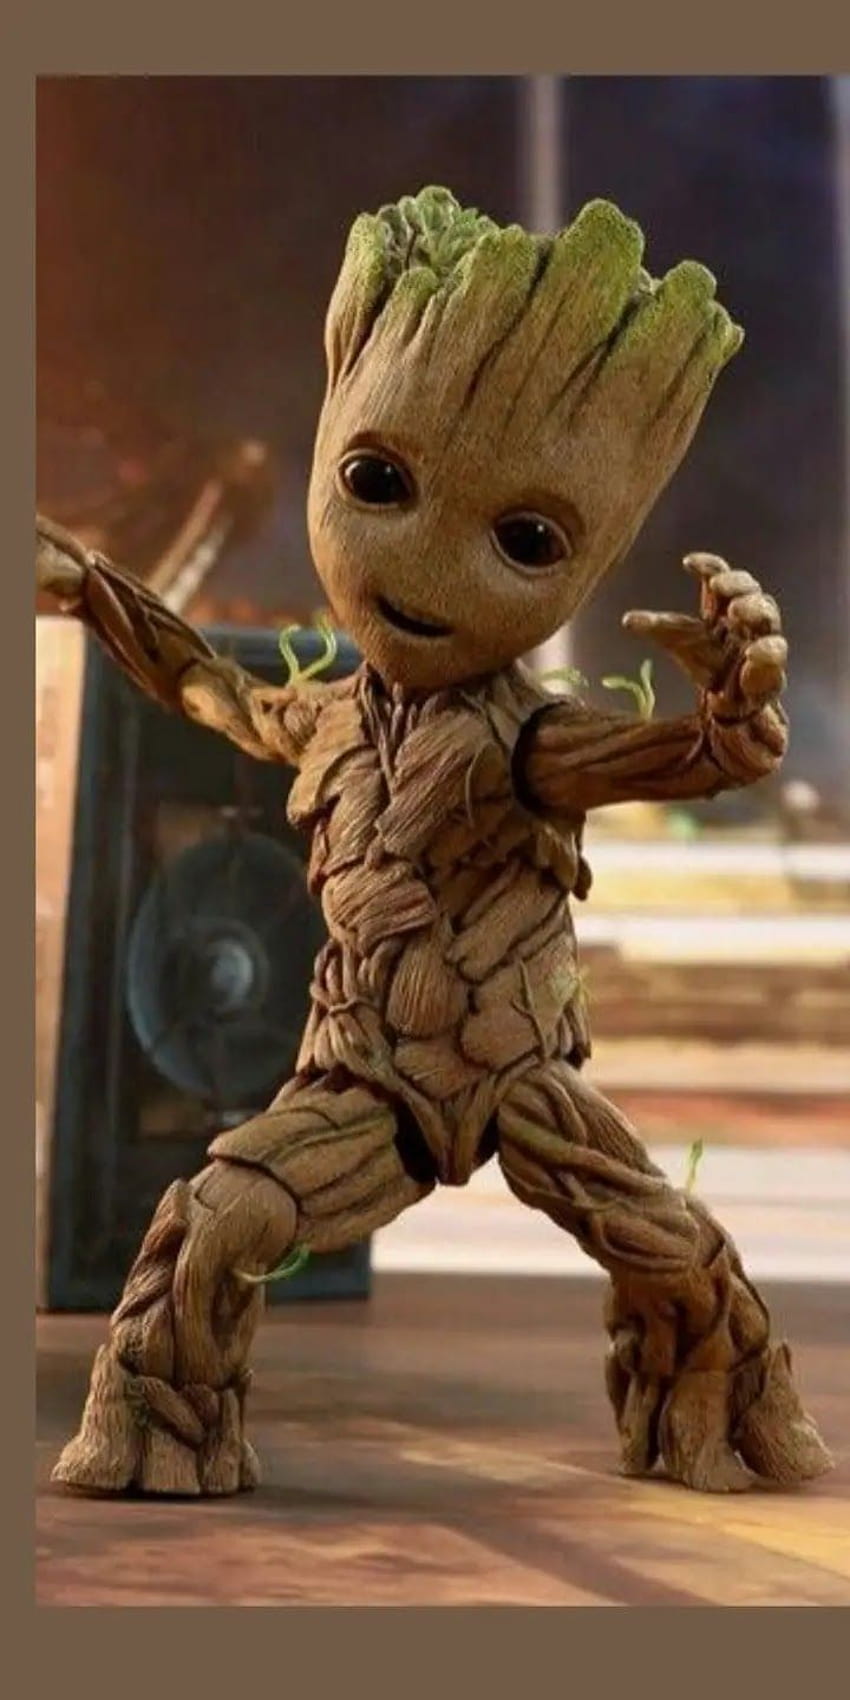 3440x1440px, 2K Free download | Baby Groot Cutest New, cute baby groot ...